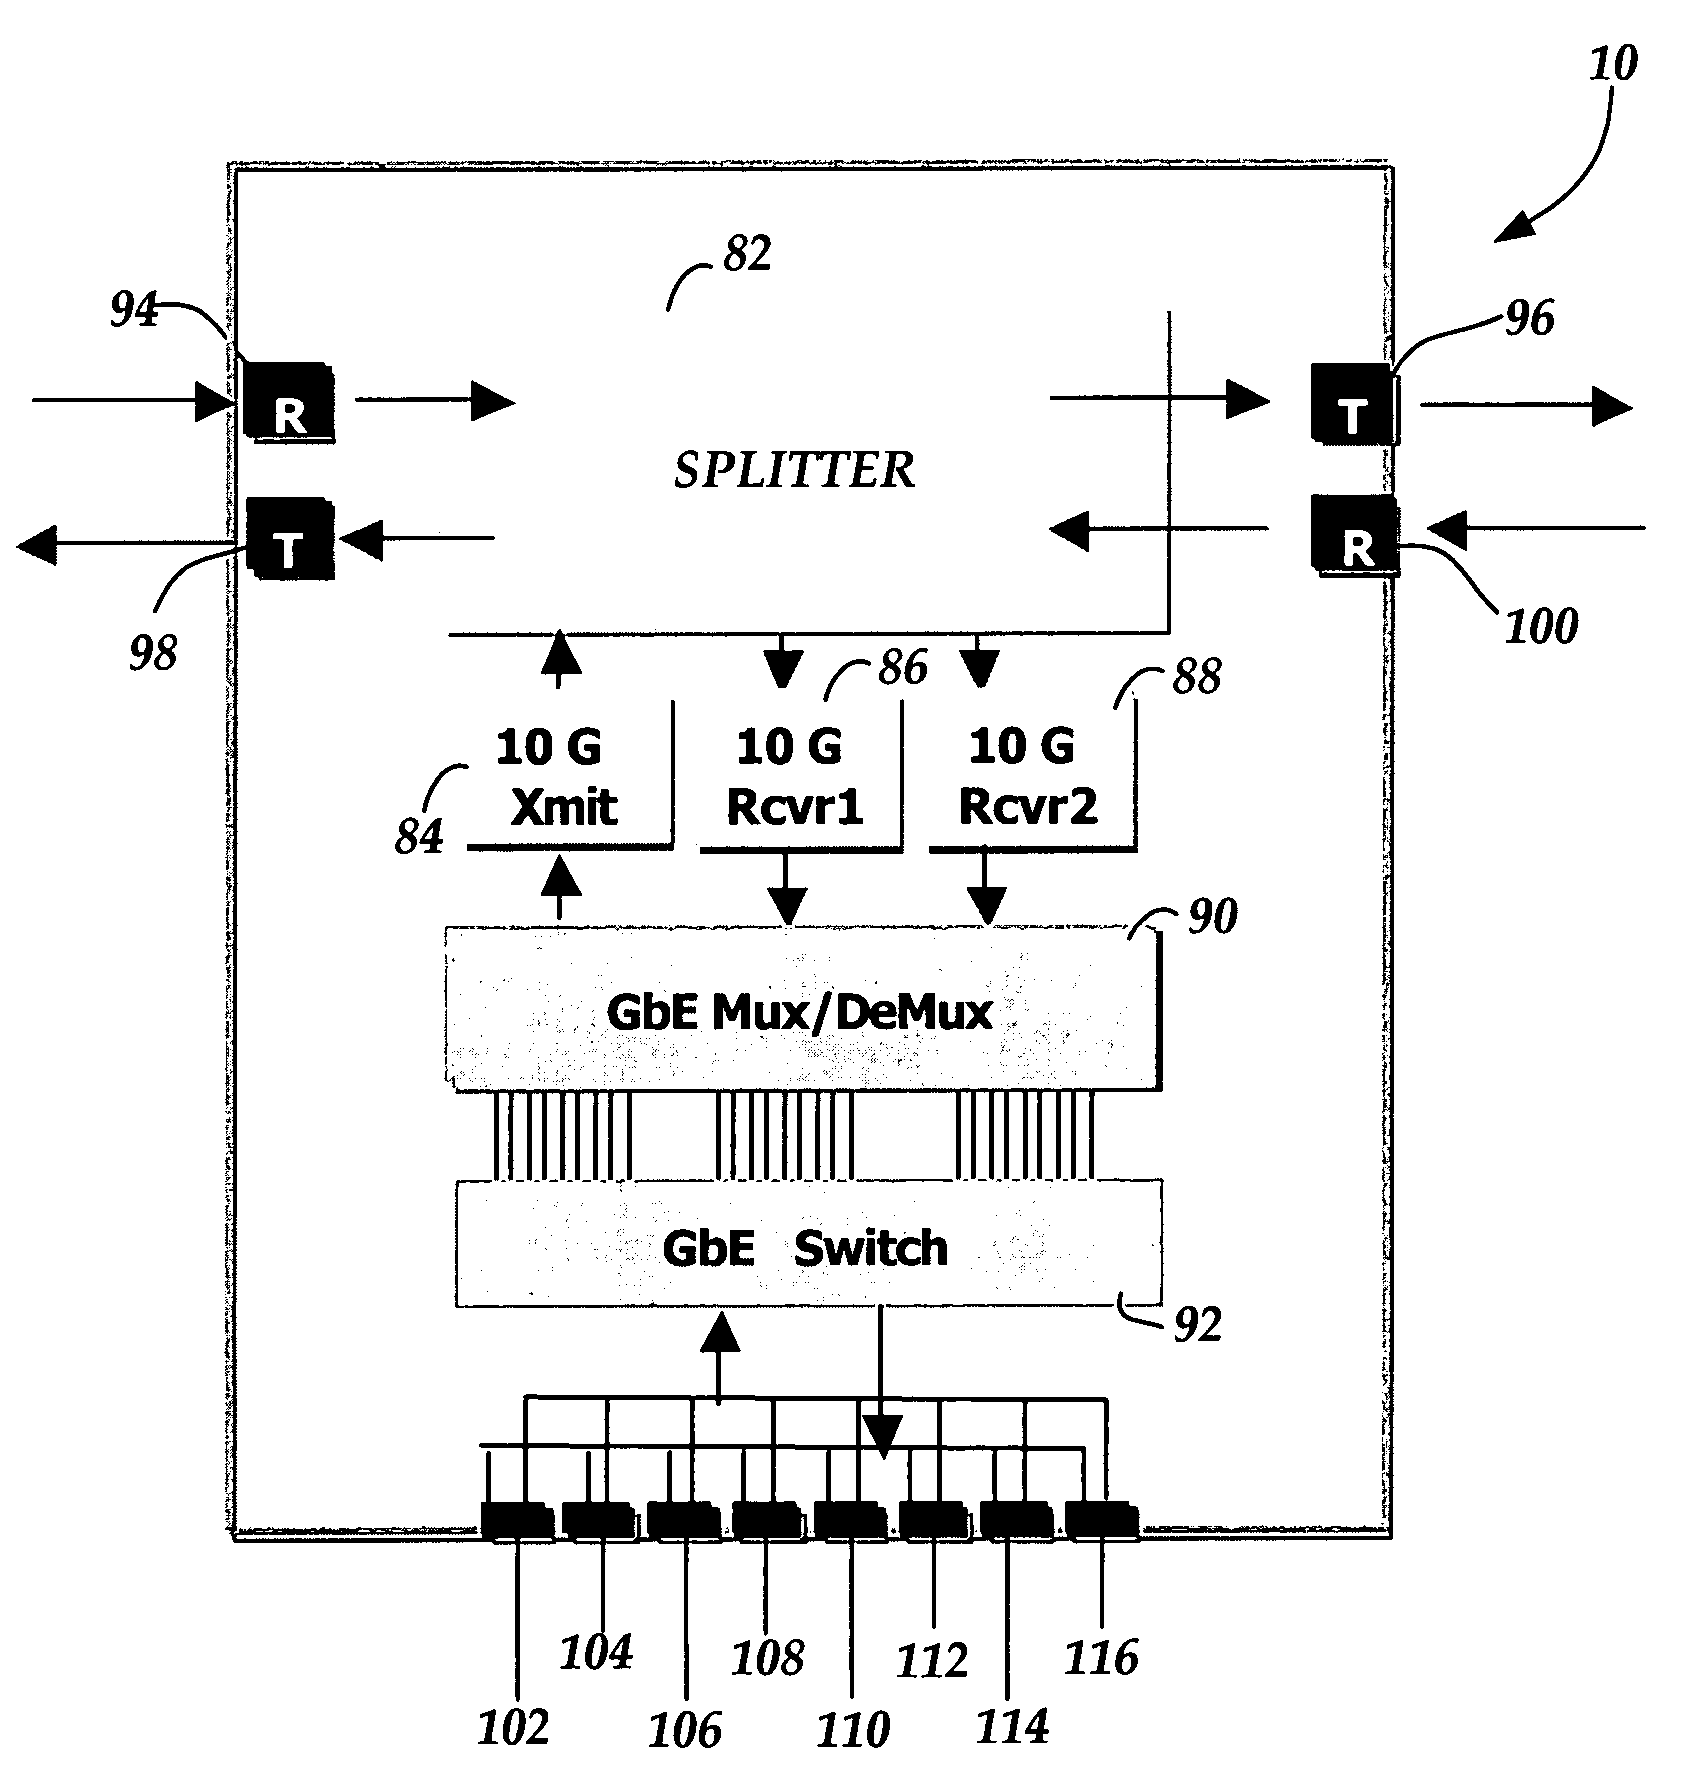 Apparatus and methods for the communication and fault management of data in a multipath data network